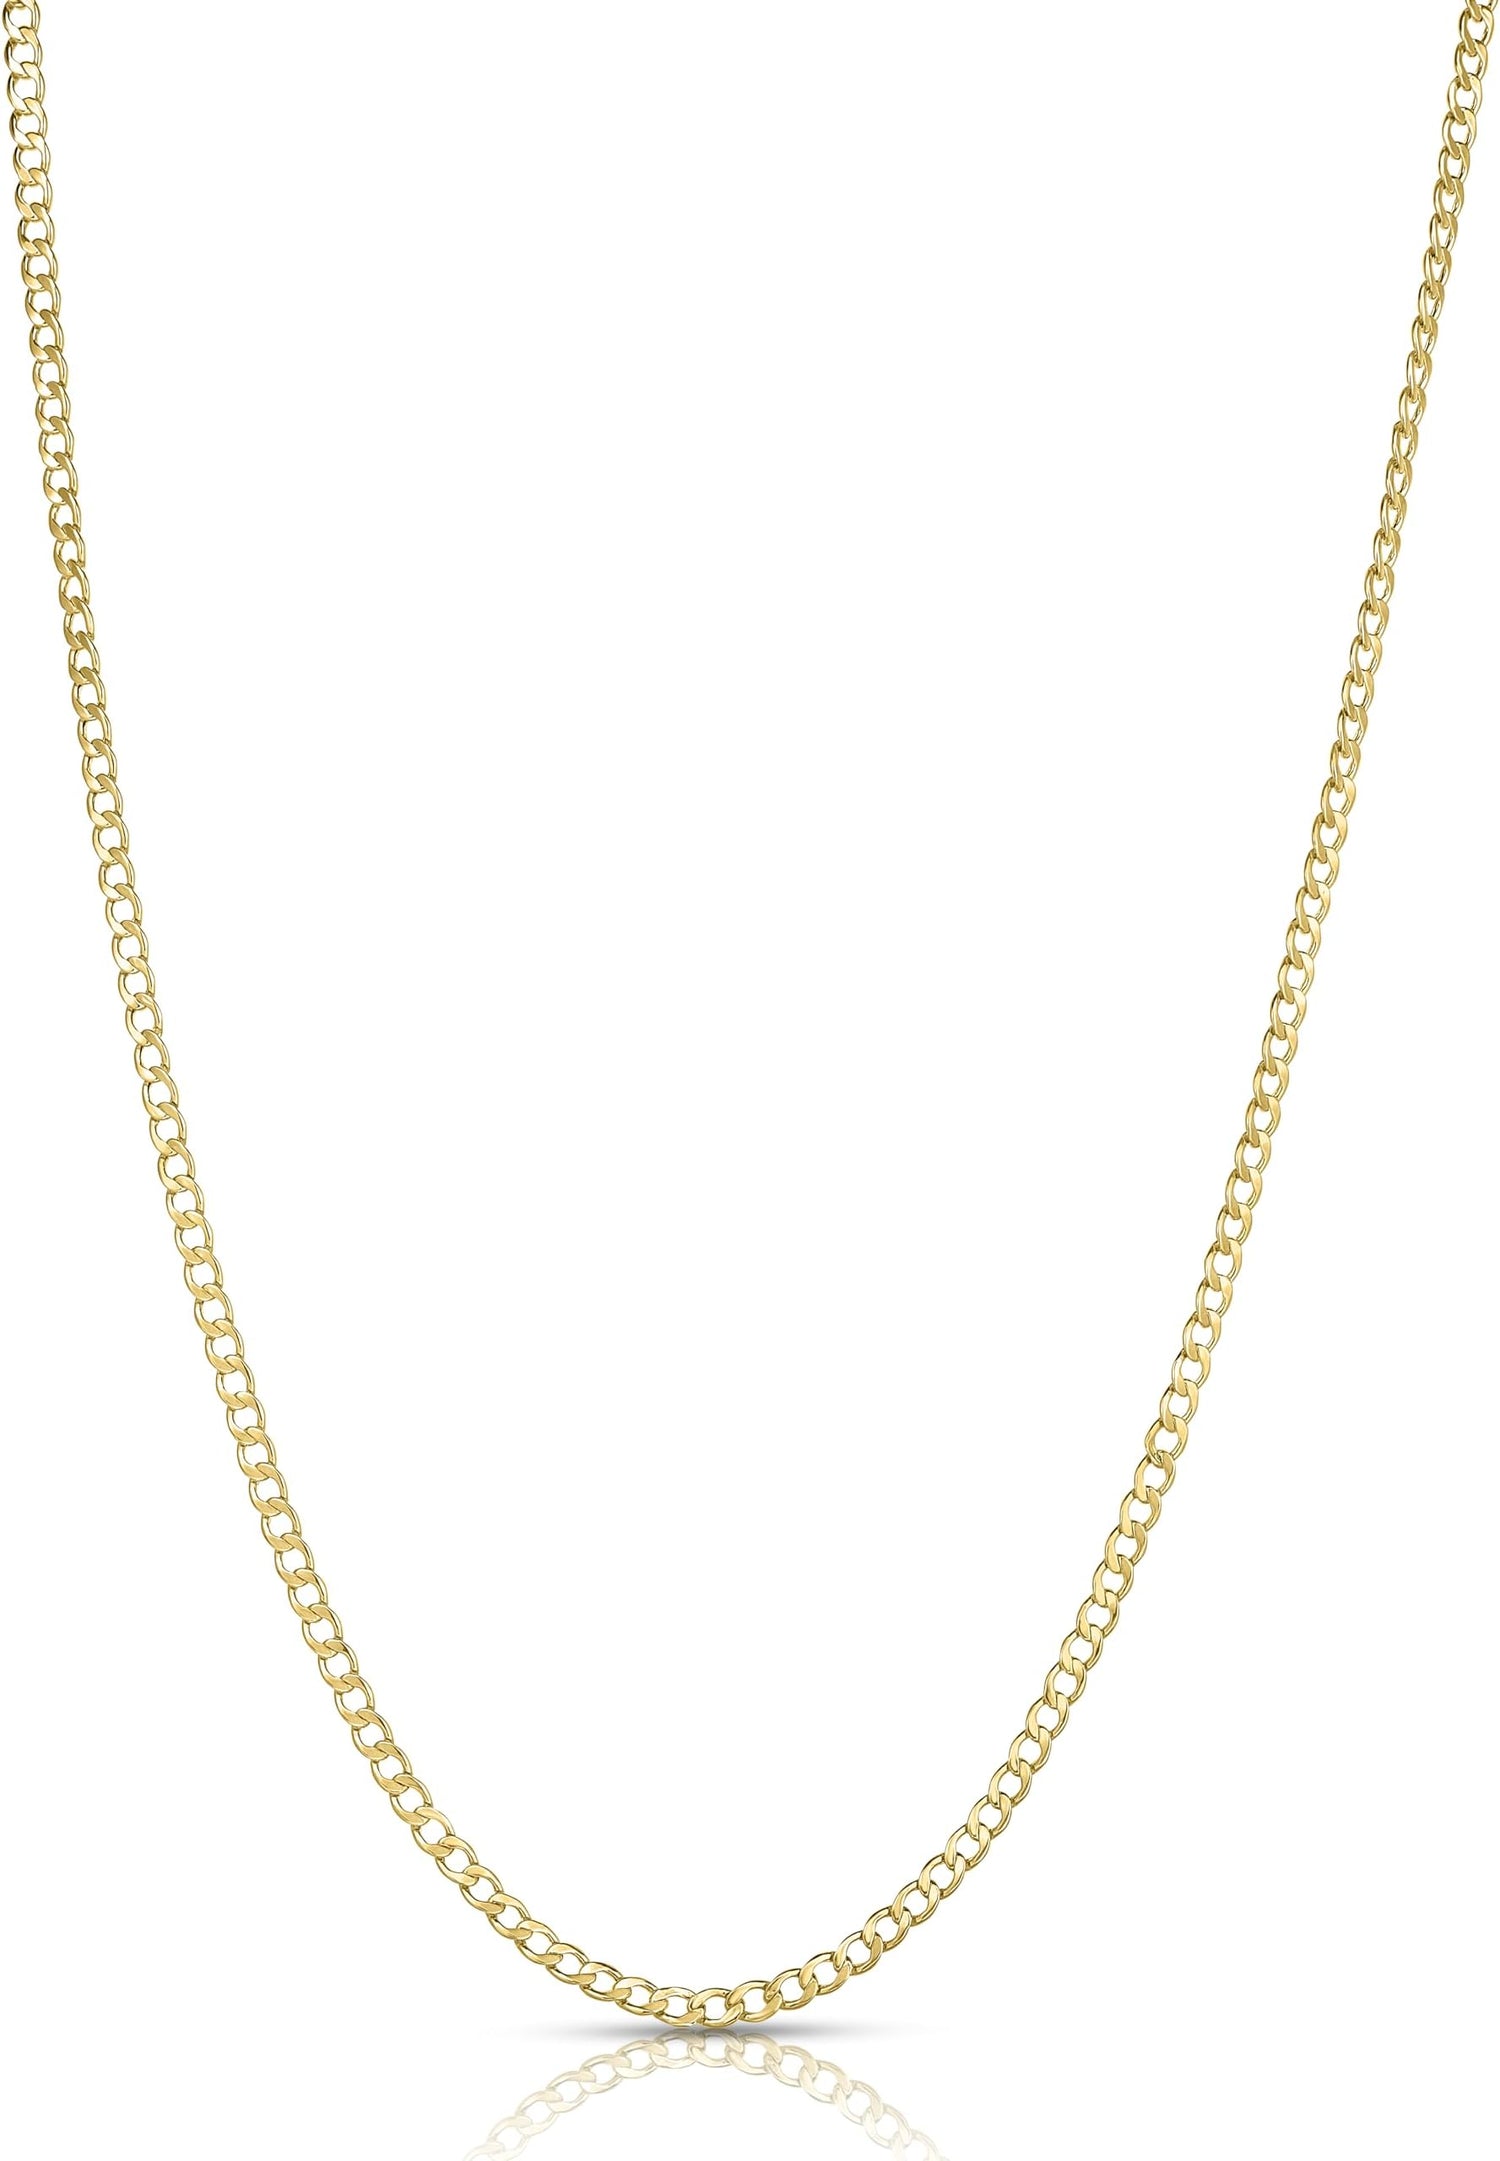 10k Yellow Gold 2.5mm Hollow Cuban Curb Link Chain Necklace